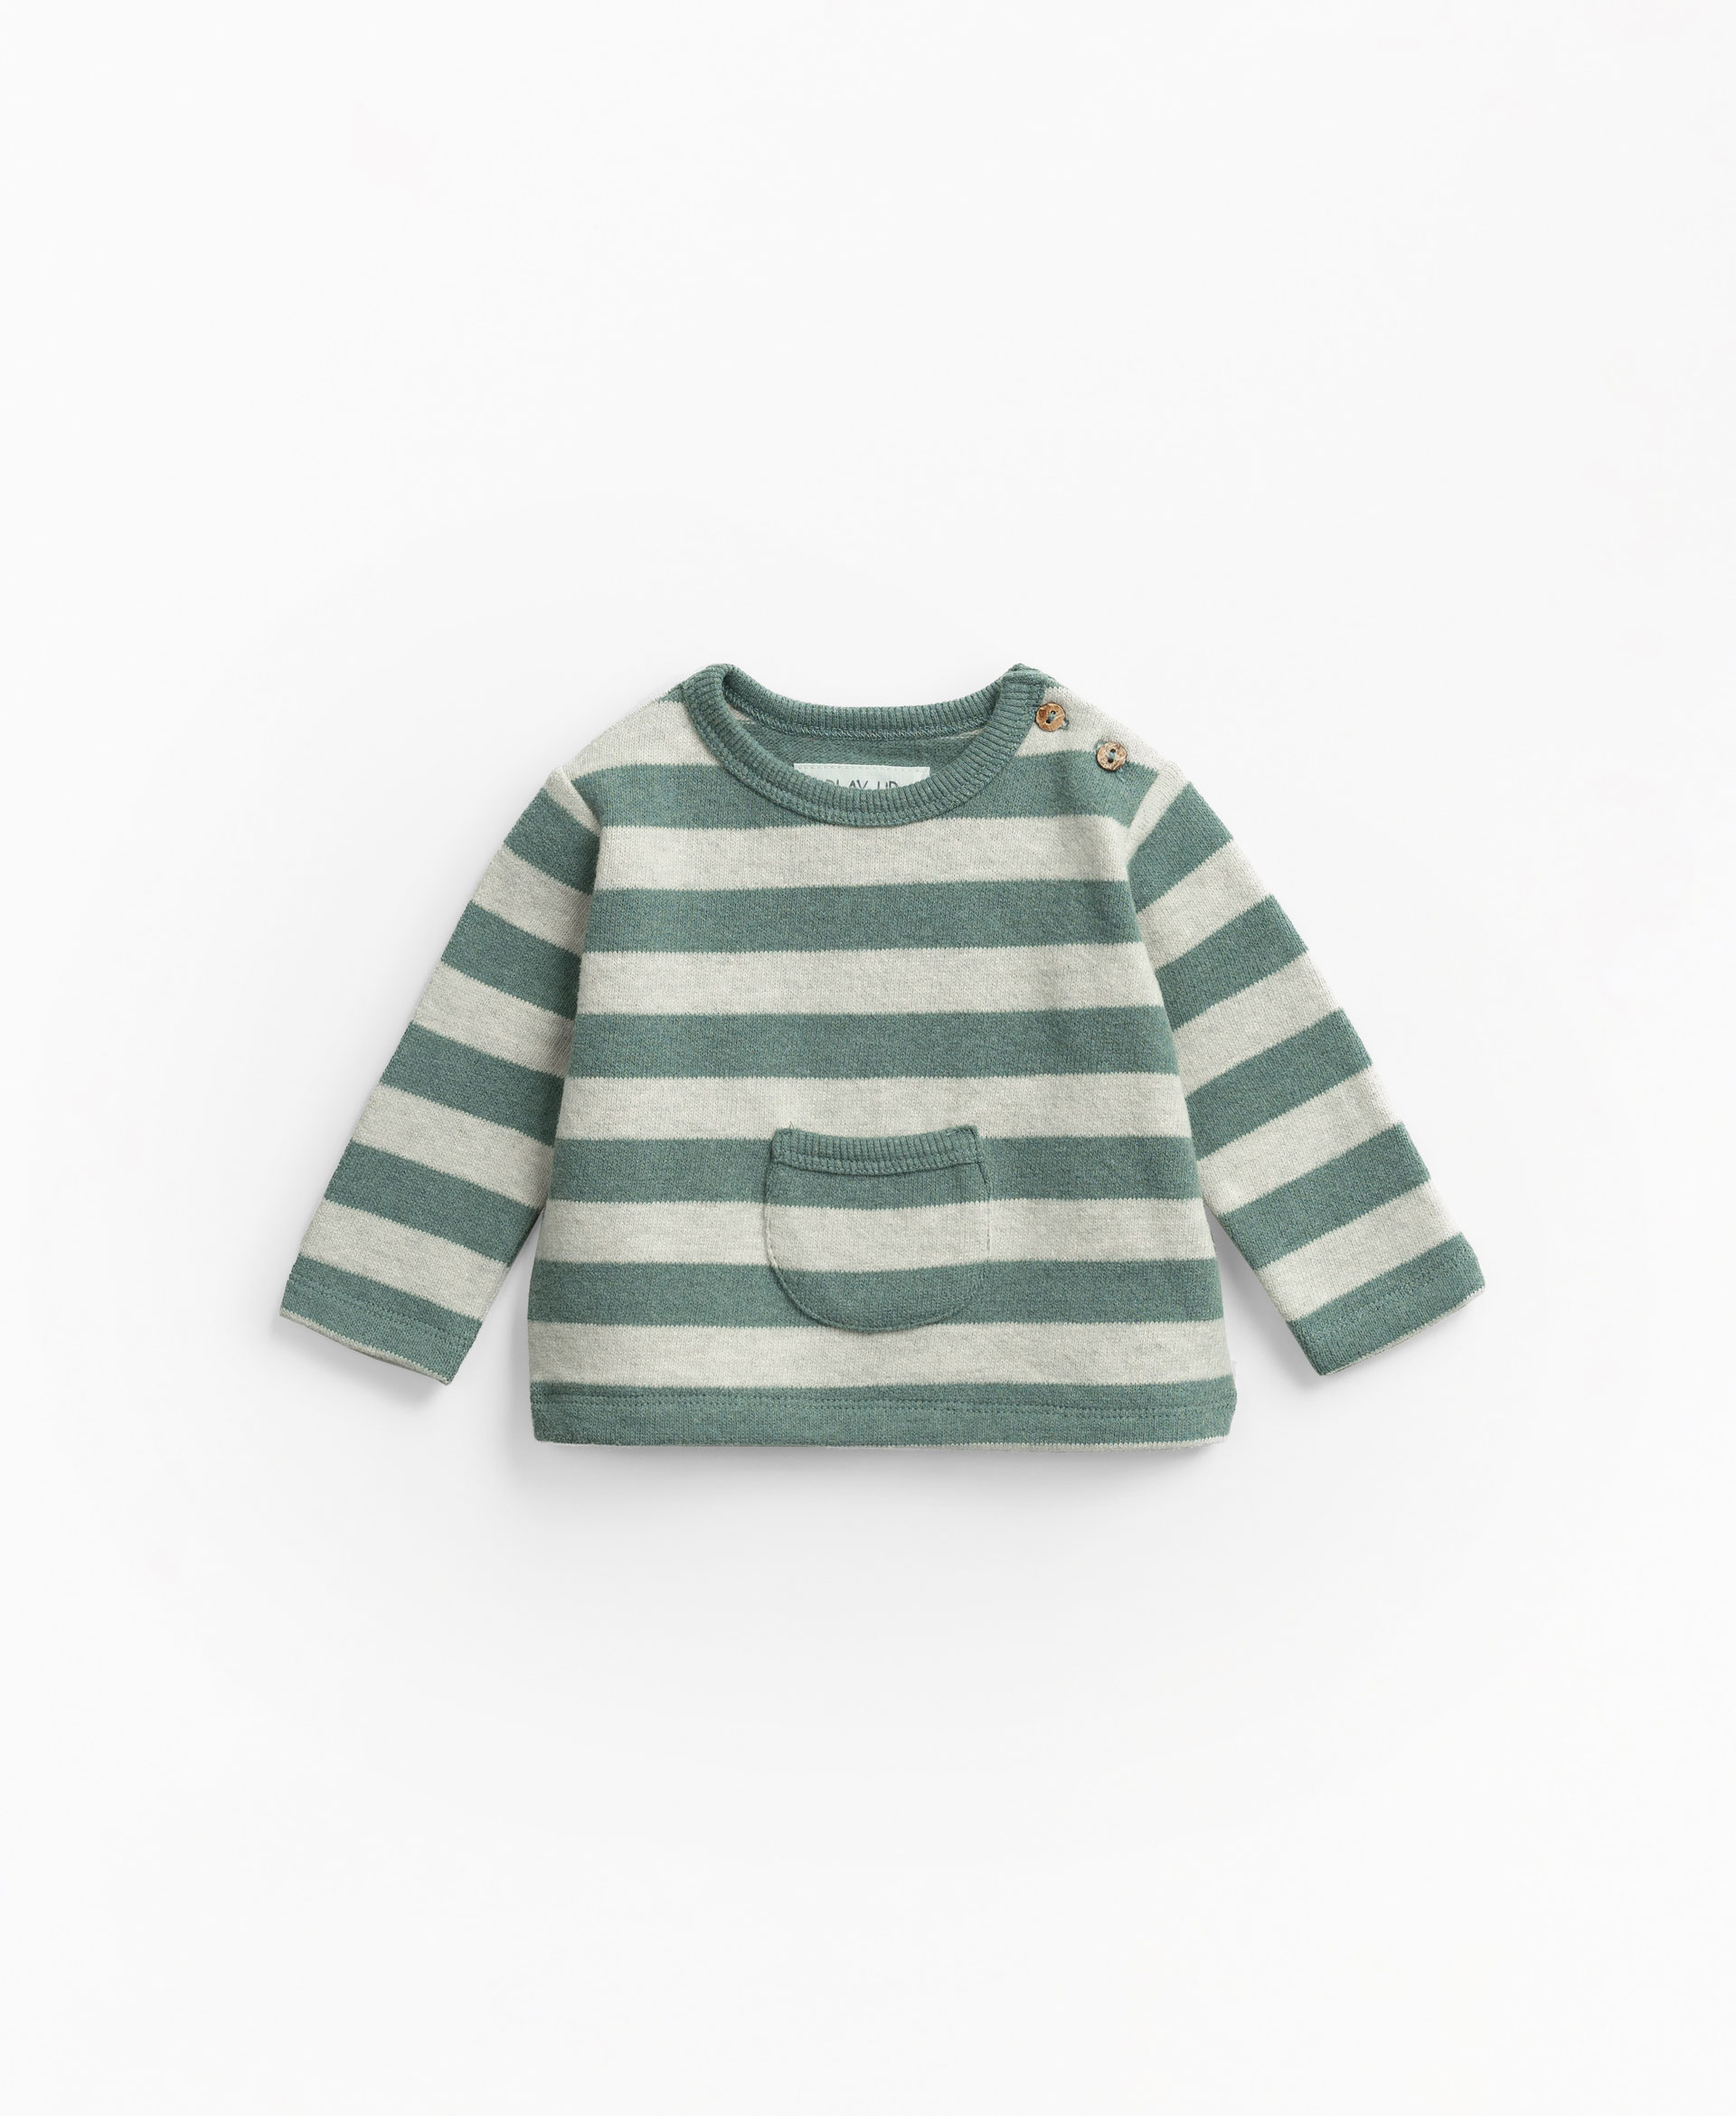 Woven striped jersey | Mother Lcia